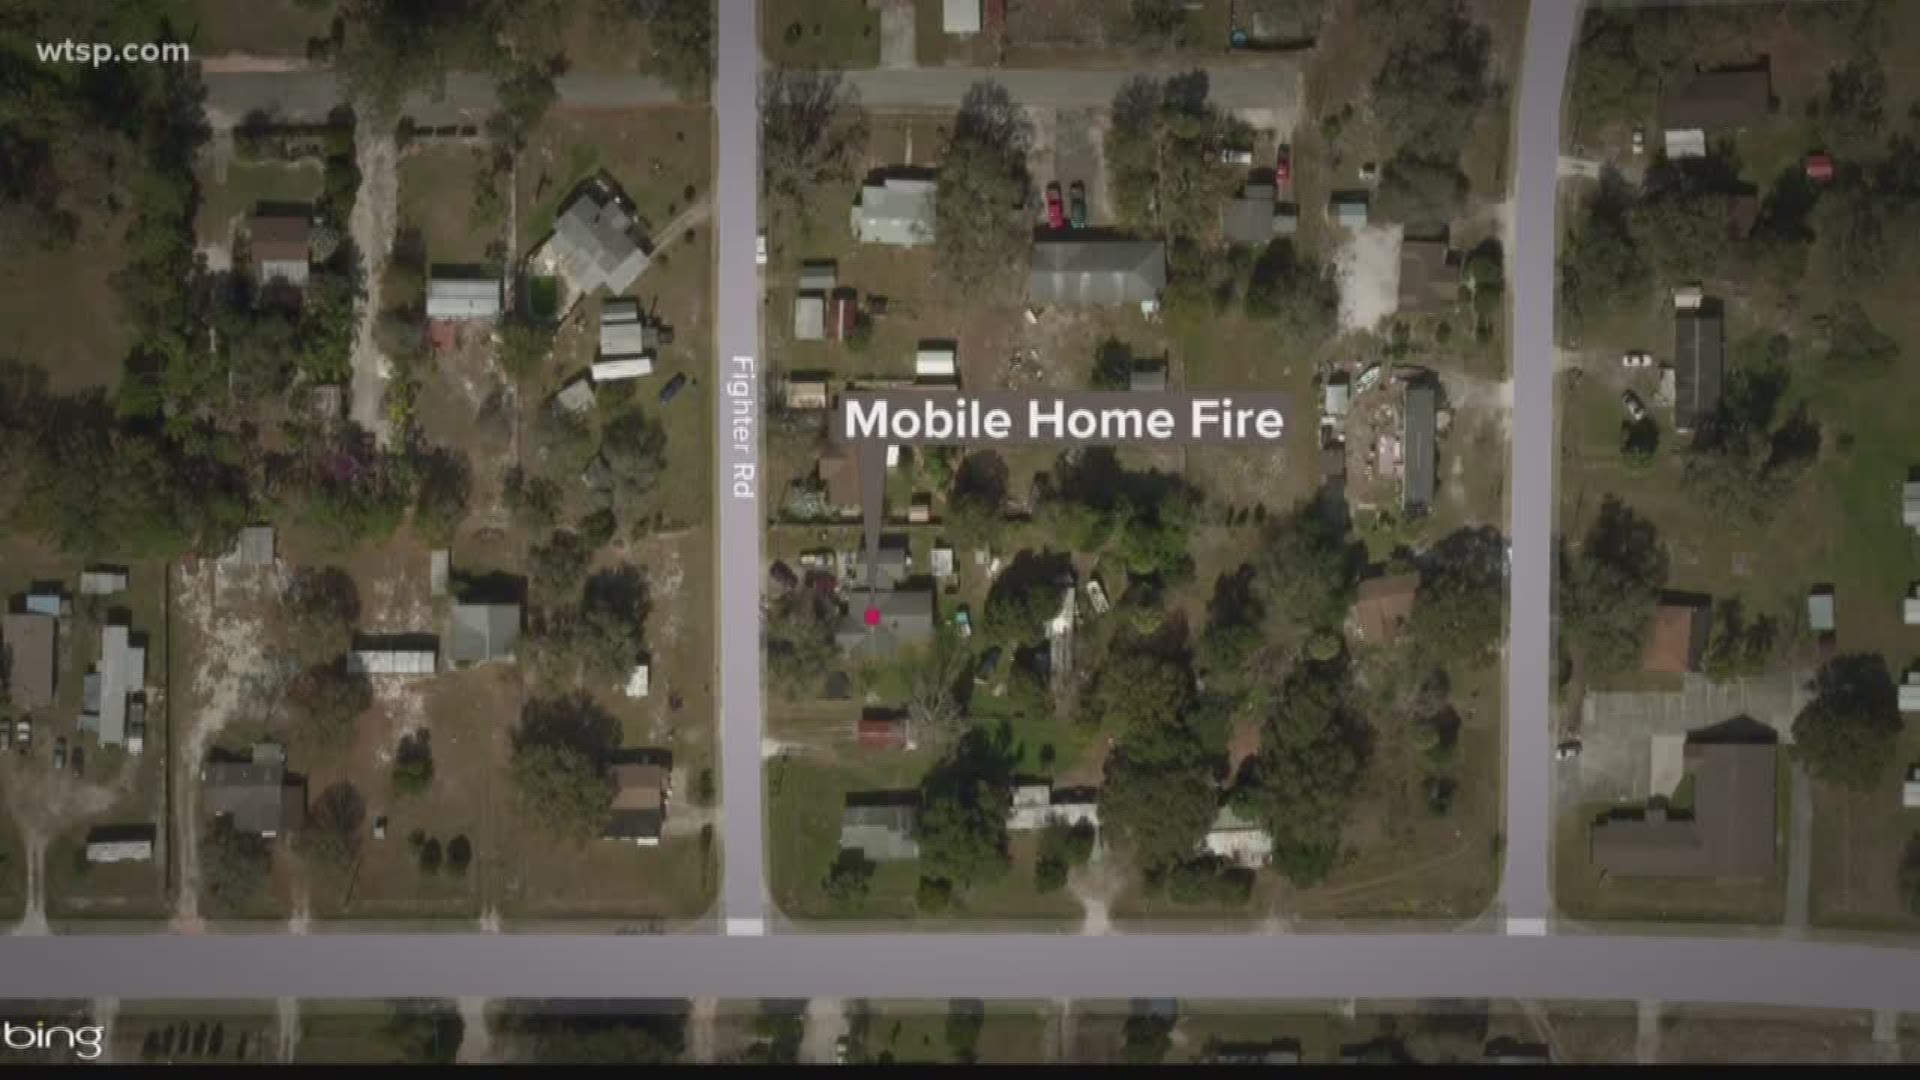 The Polk County Sheriff's Office said an elderly couple didn't make it out of the home when the fire broke out early Friday morning. https://on.wtsp.com/2HKMjTV